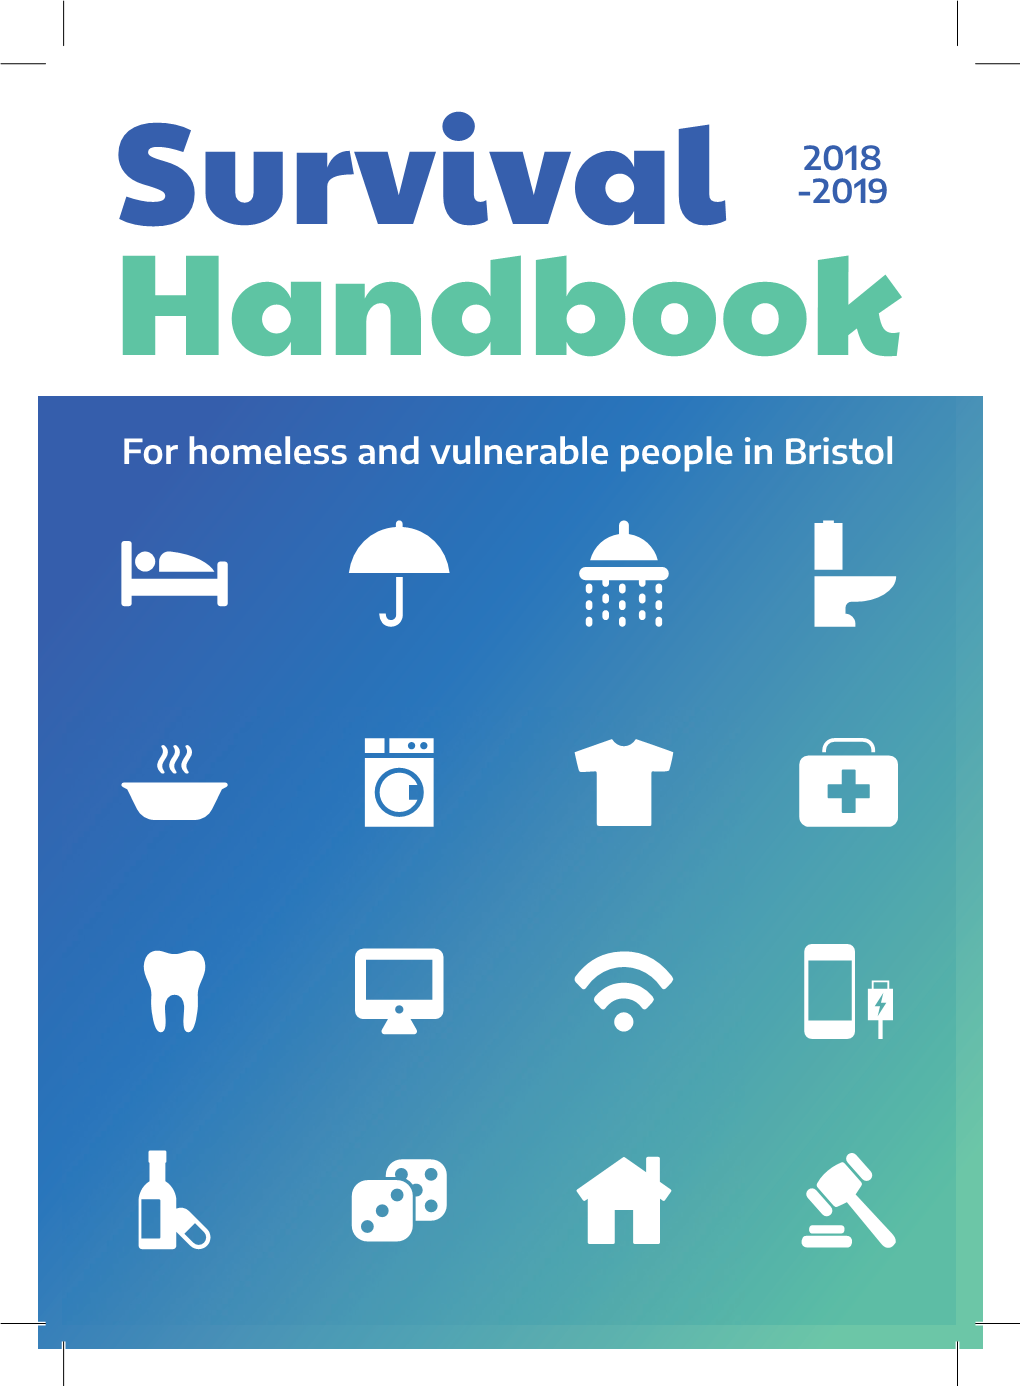 Survival Handbook Is Populated by Information from Bristolhomelessconnect.Com, Which Provides Details of All the Homelessness Services Available in Bristol